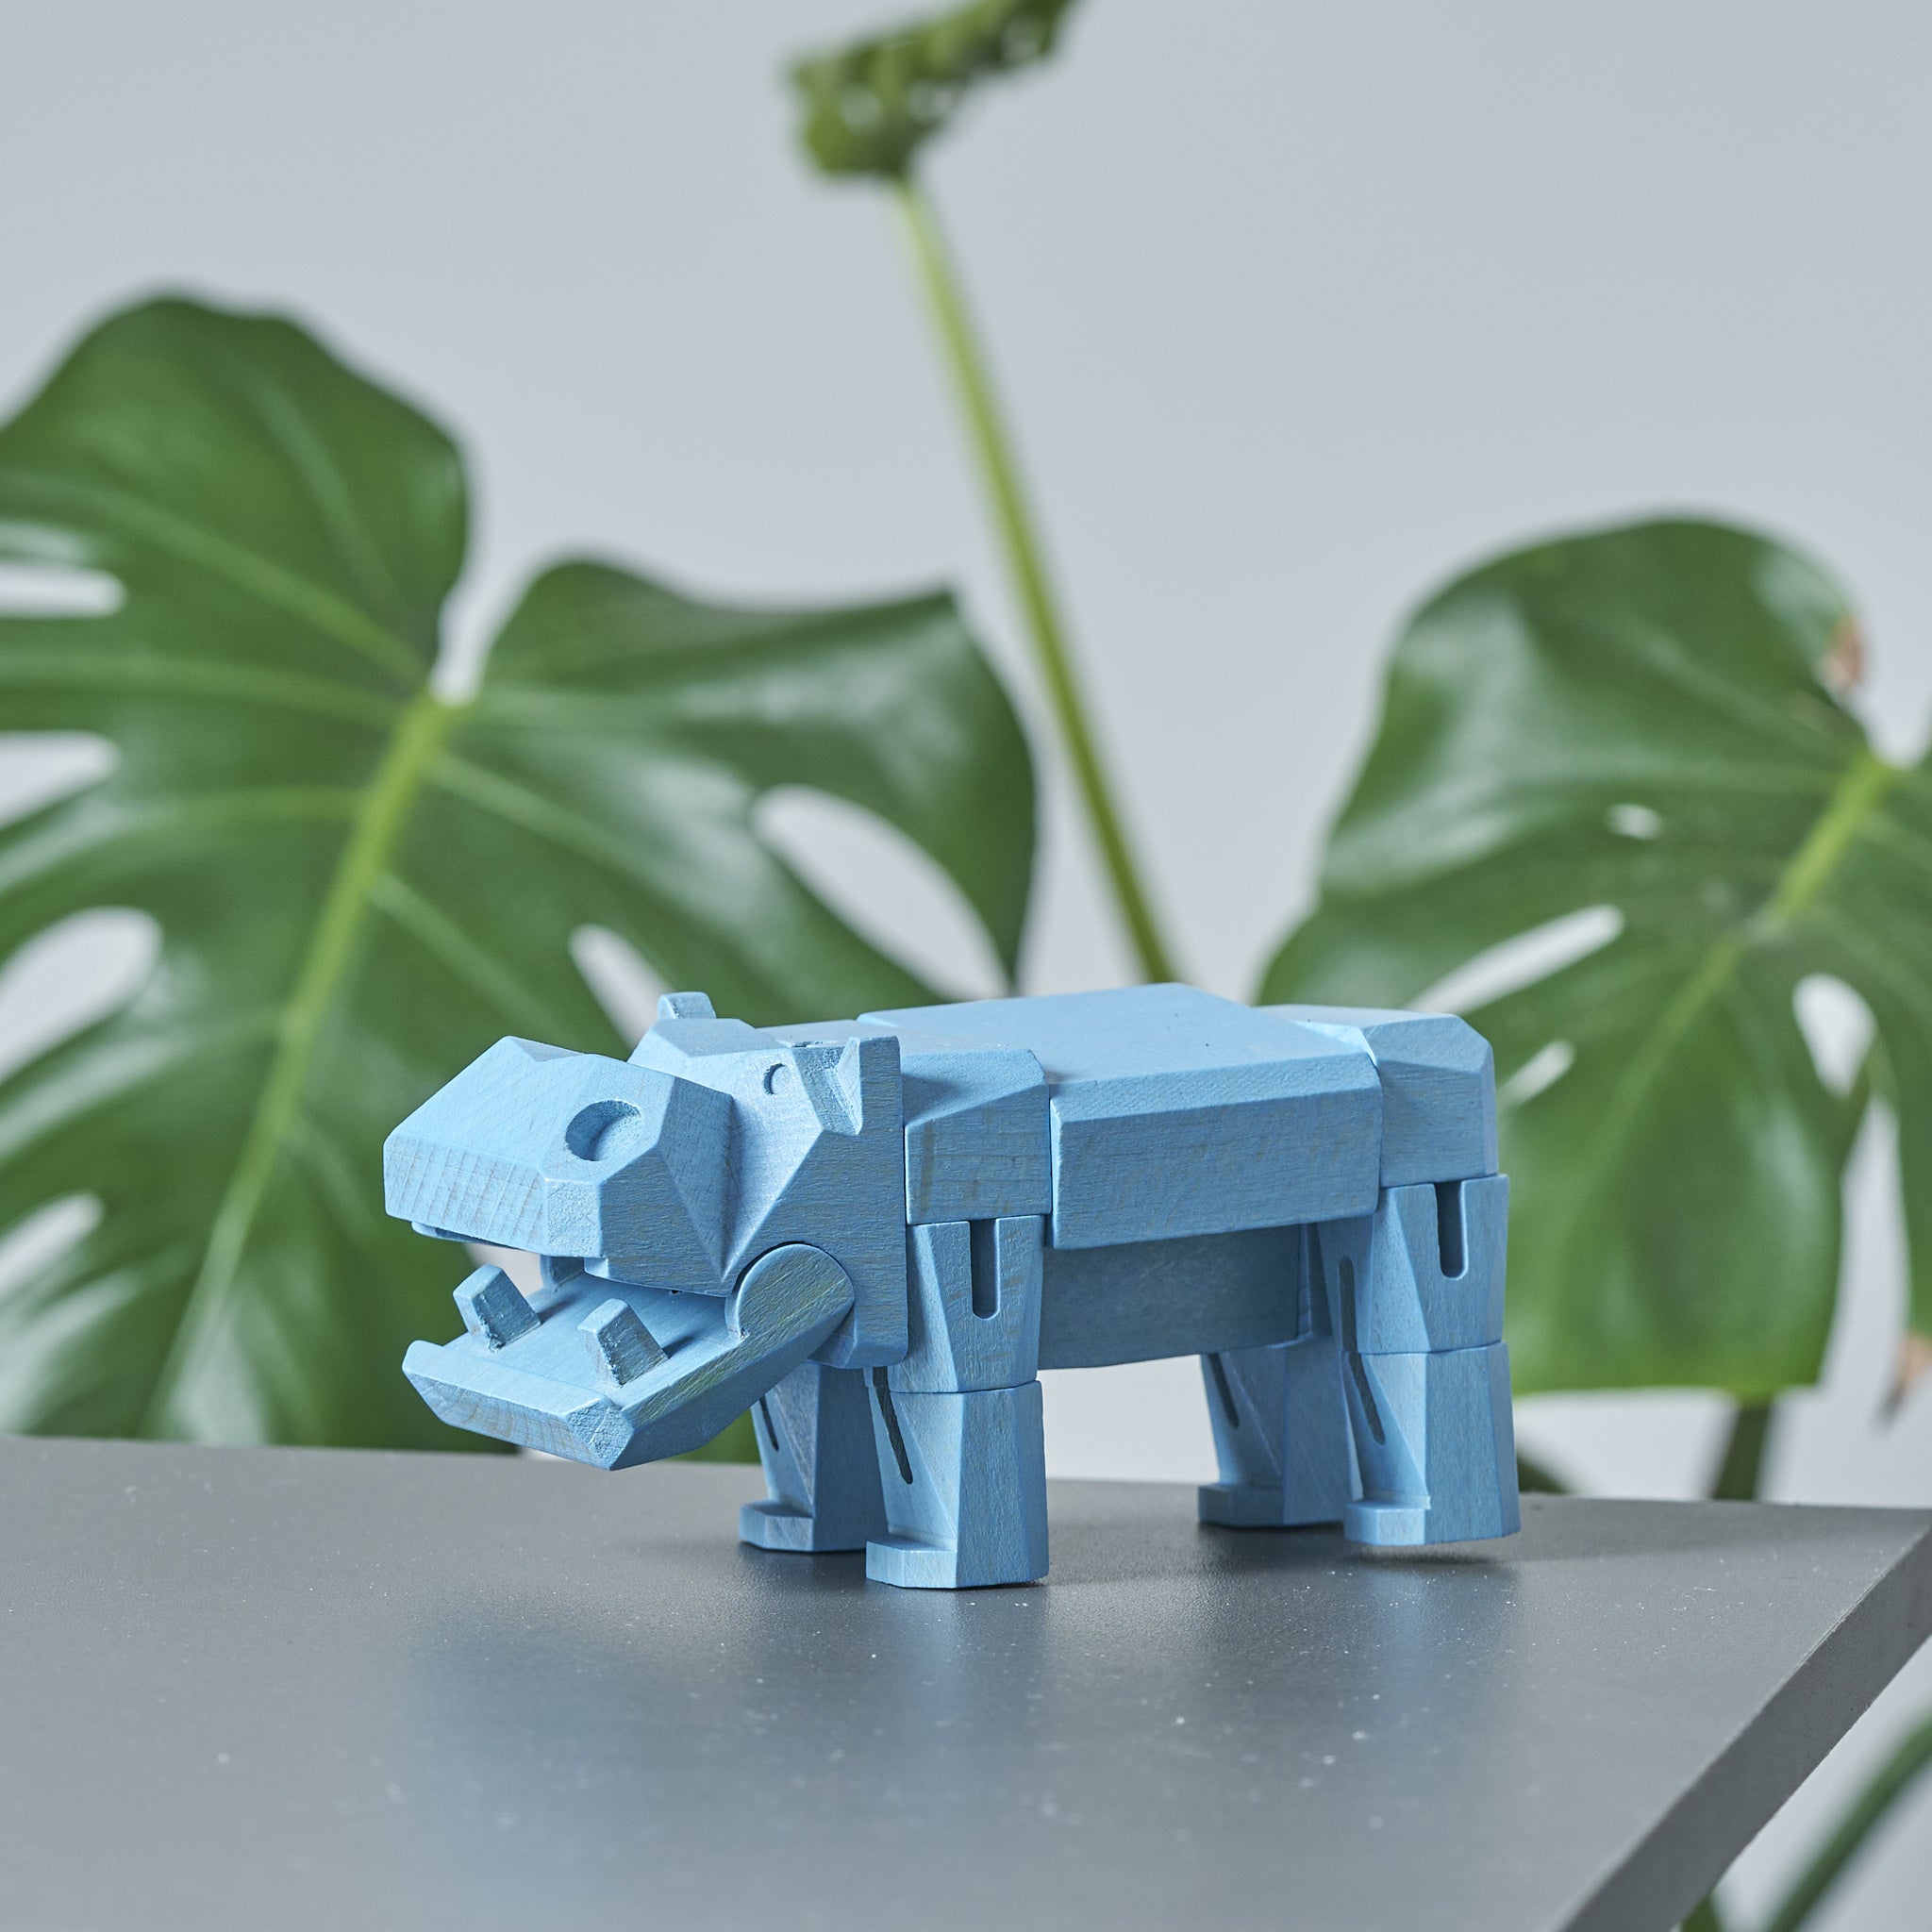 Morphits ® Hippo Wooden Toy: Explore the Wild with Poseable Wooden Playset Friends - Yoshiaki Ito Design Stand B3